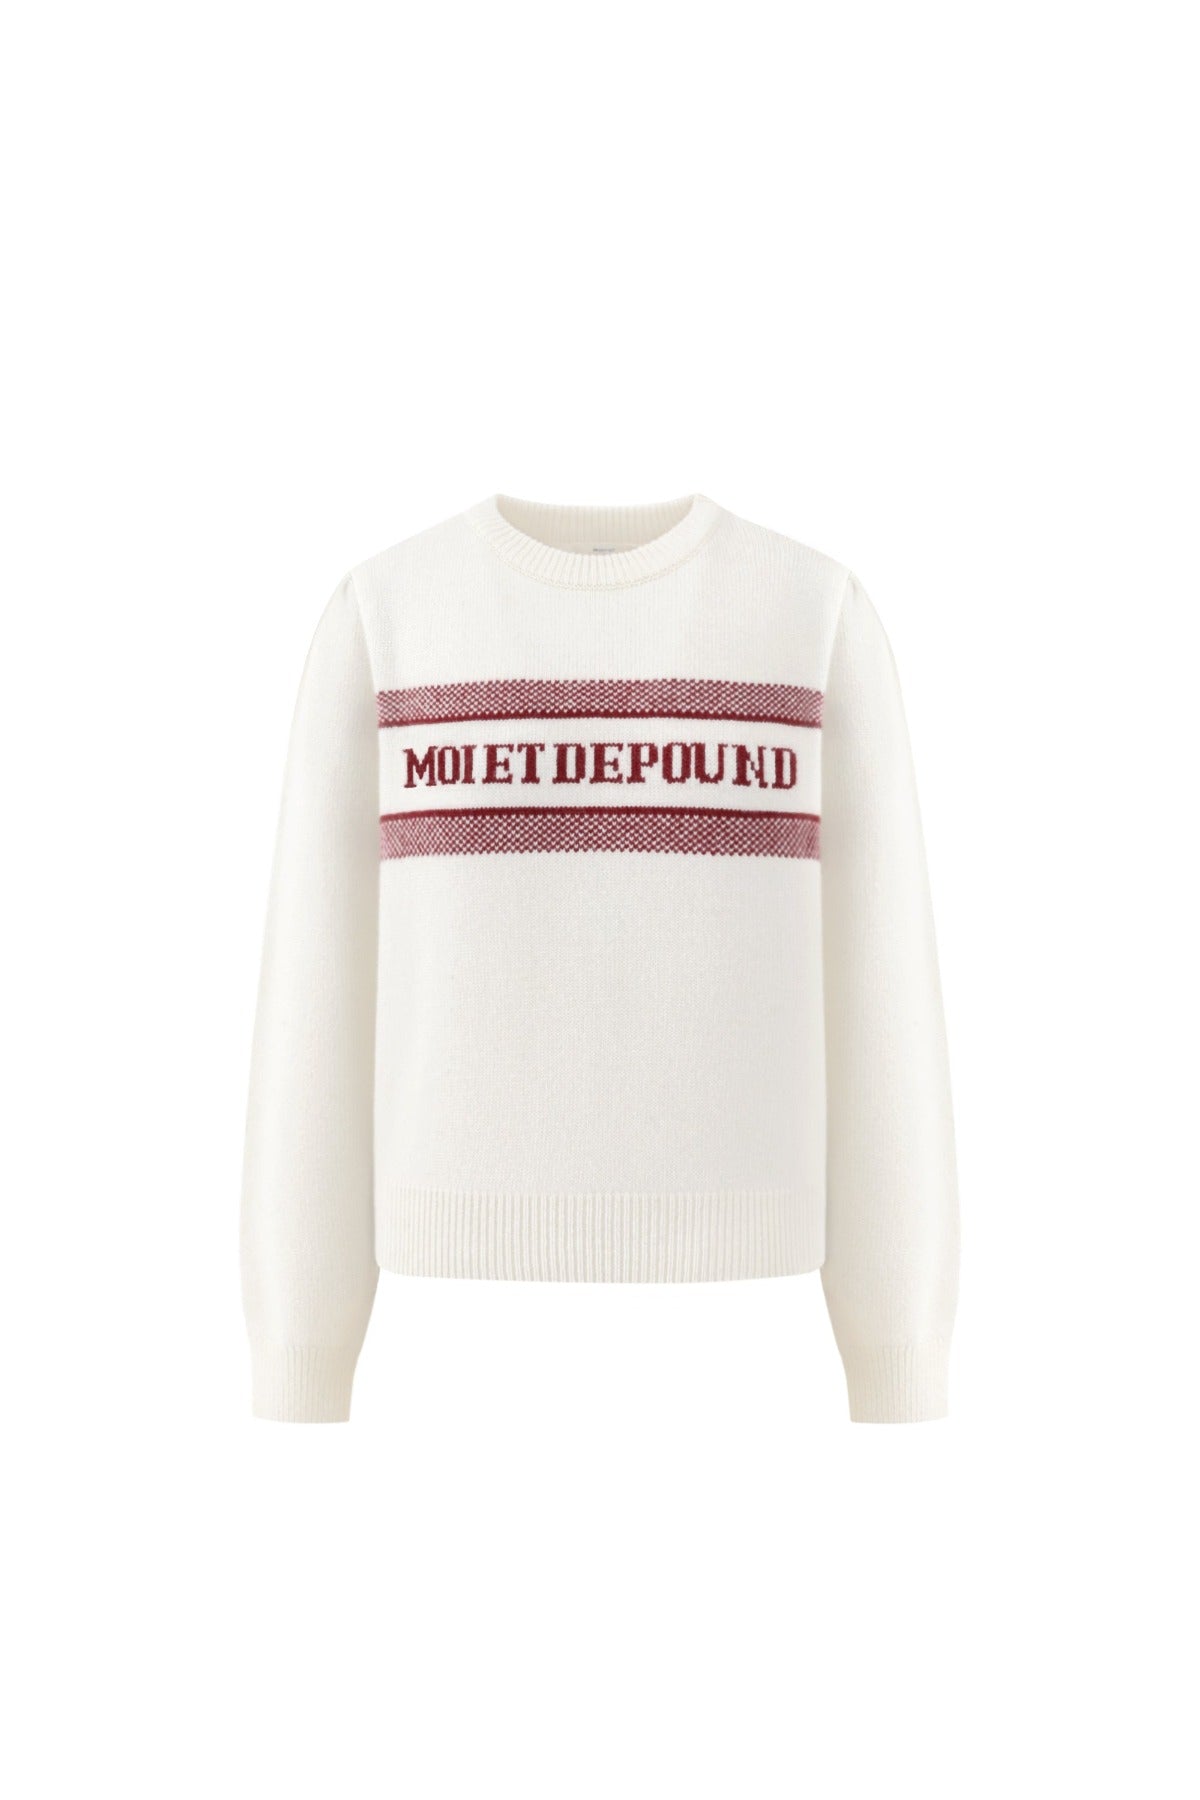 Puff Jacquard Knit In Ivory